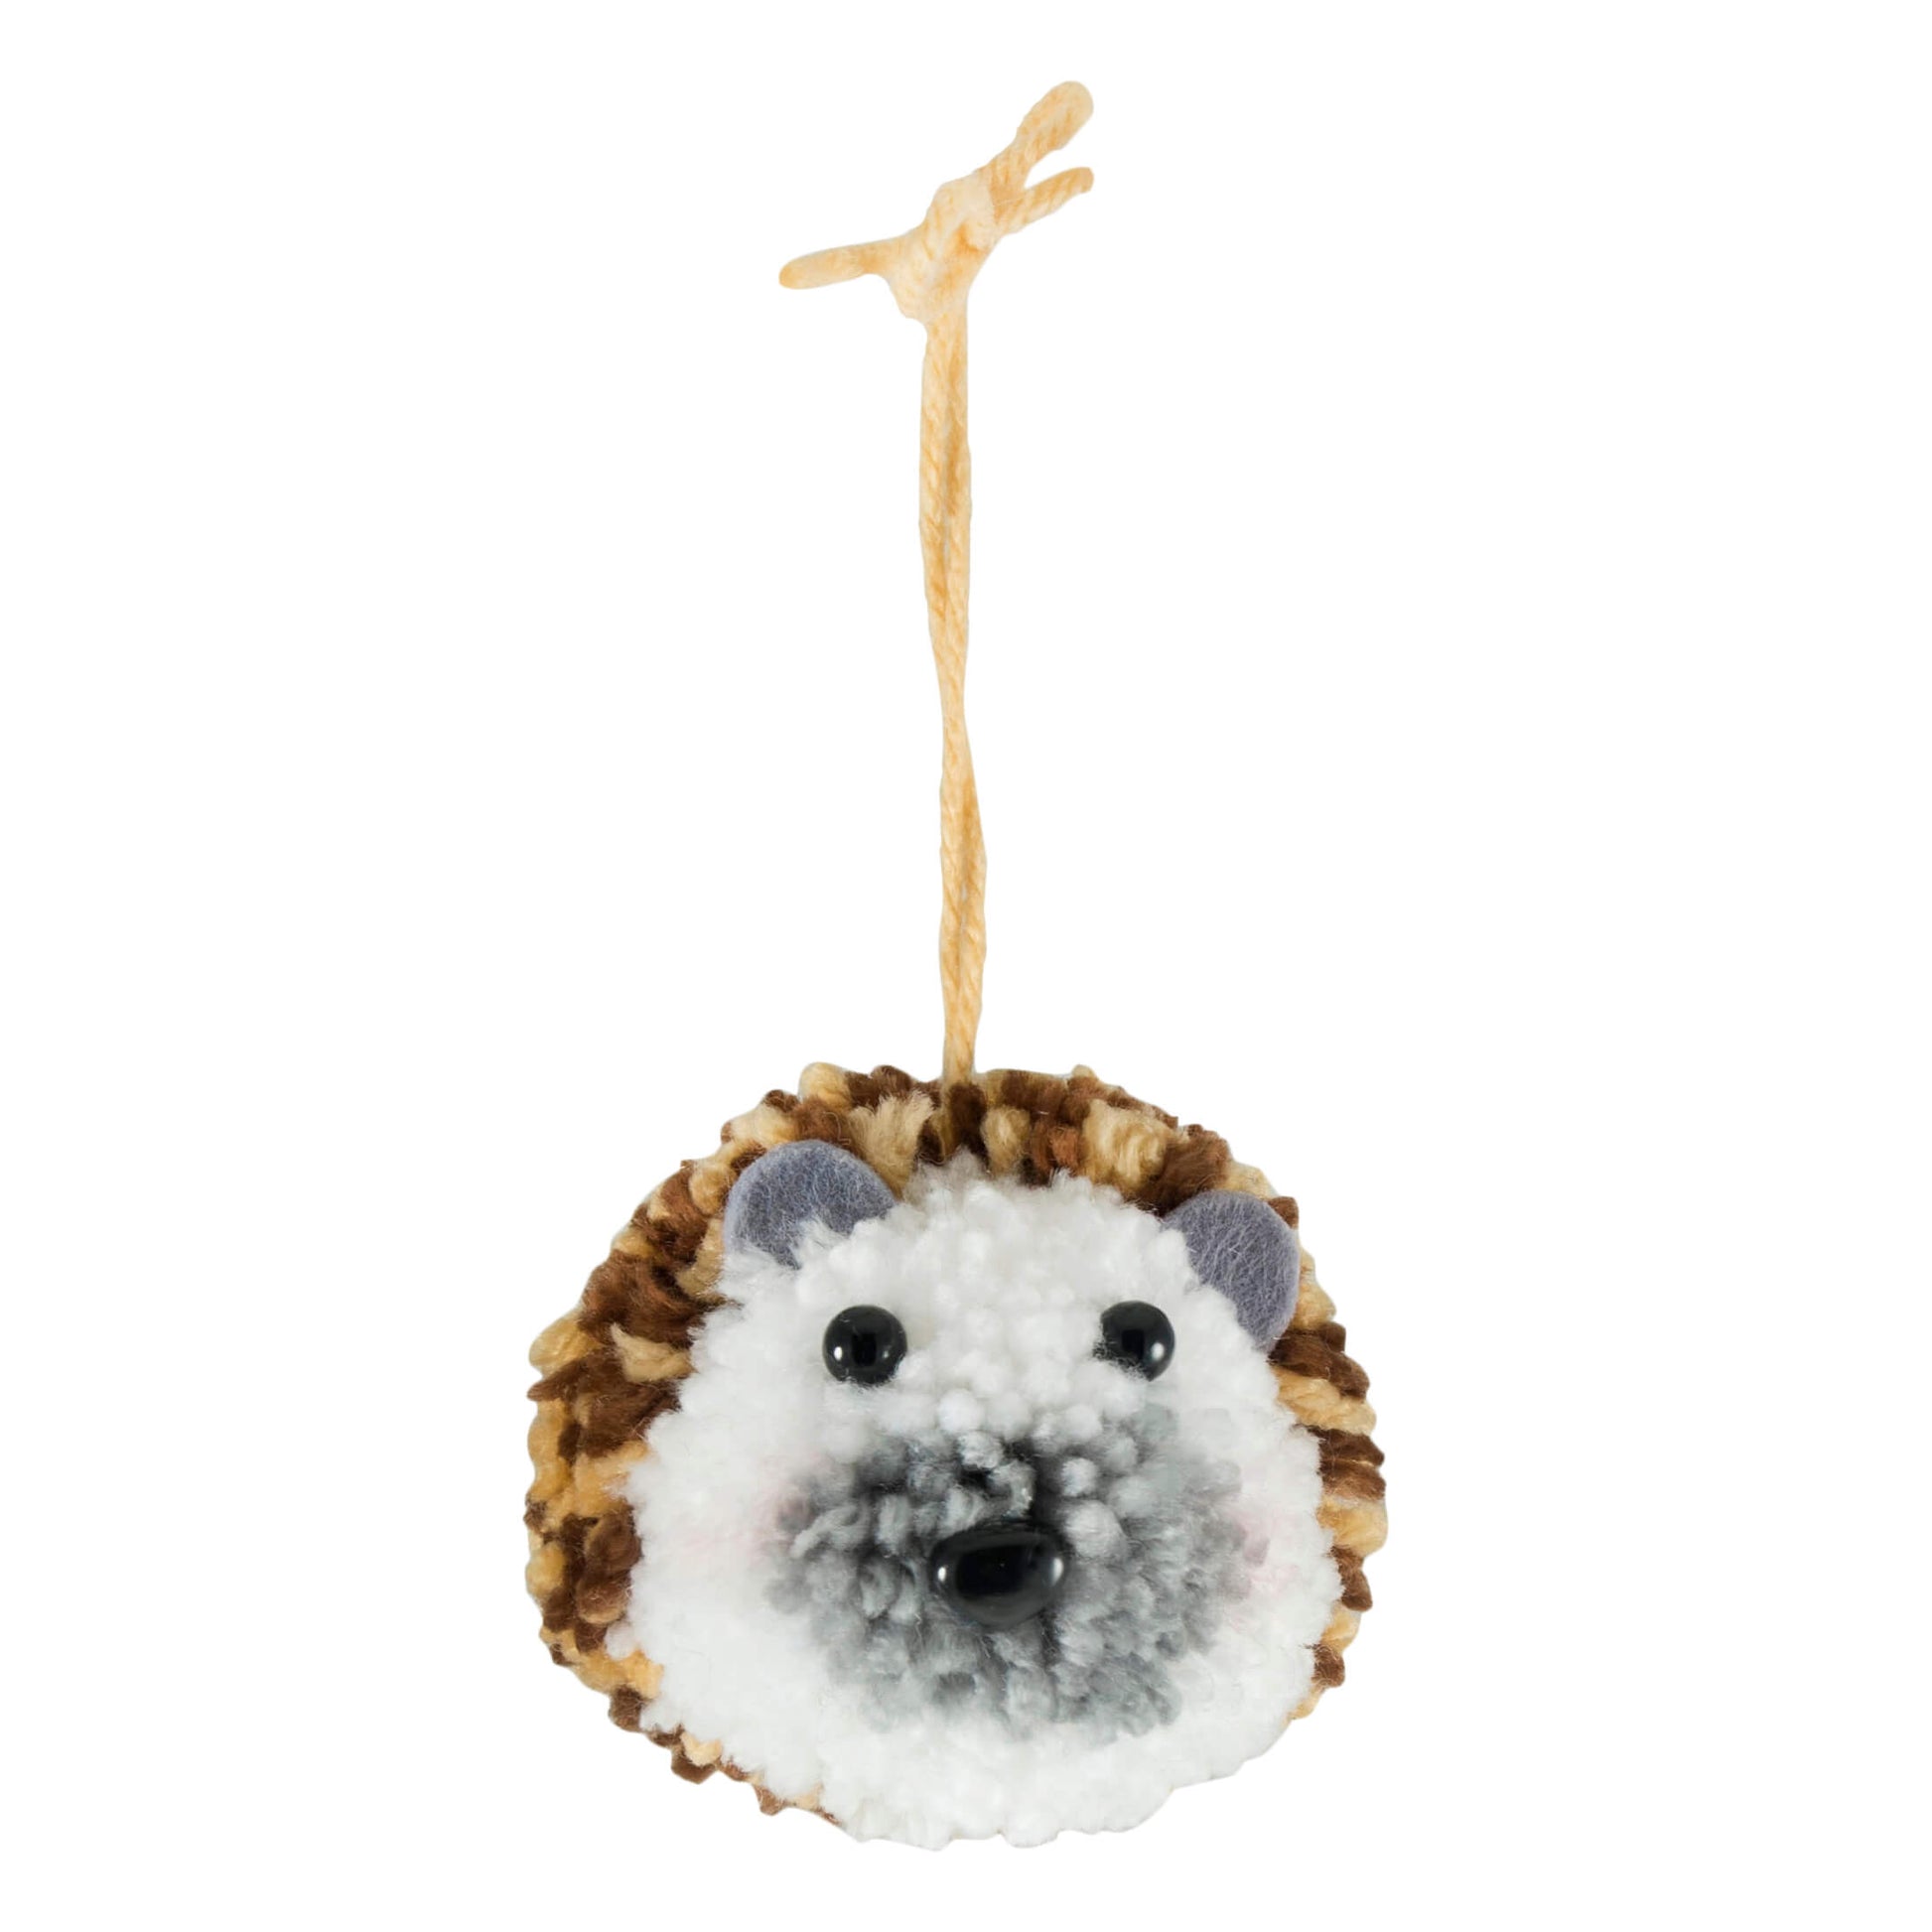  The image shows a pom pom hedgehog hanging from a string on a white background.